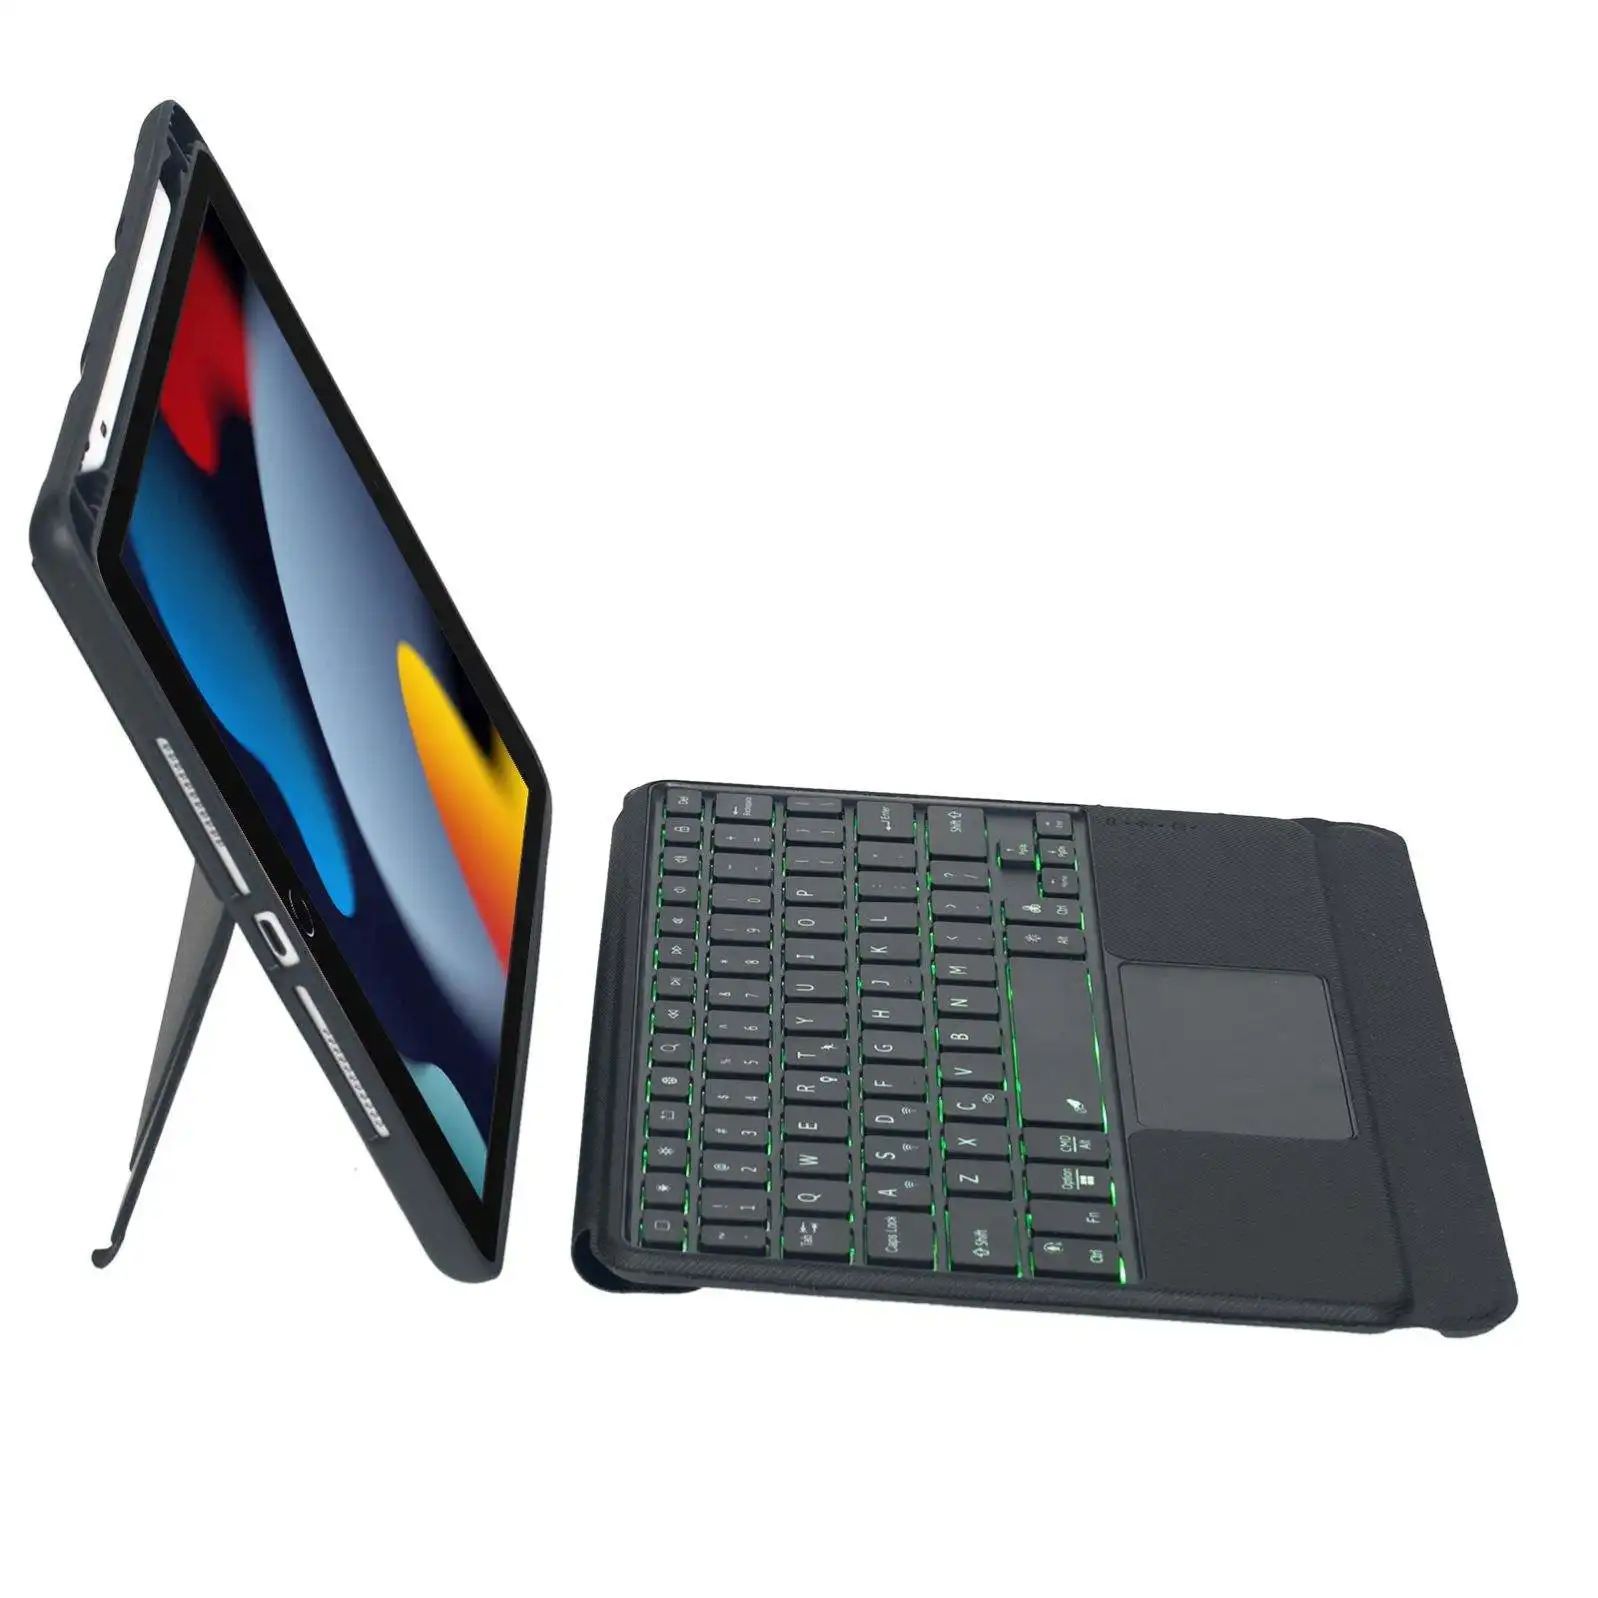 11 Inch Tablet Mechanical Keyboards for Laptop Tablet English Arabic Fashion Mini Keyboard with ABS Material